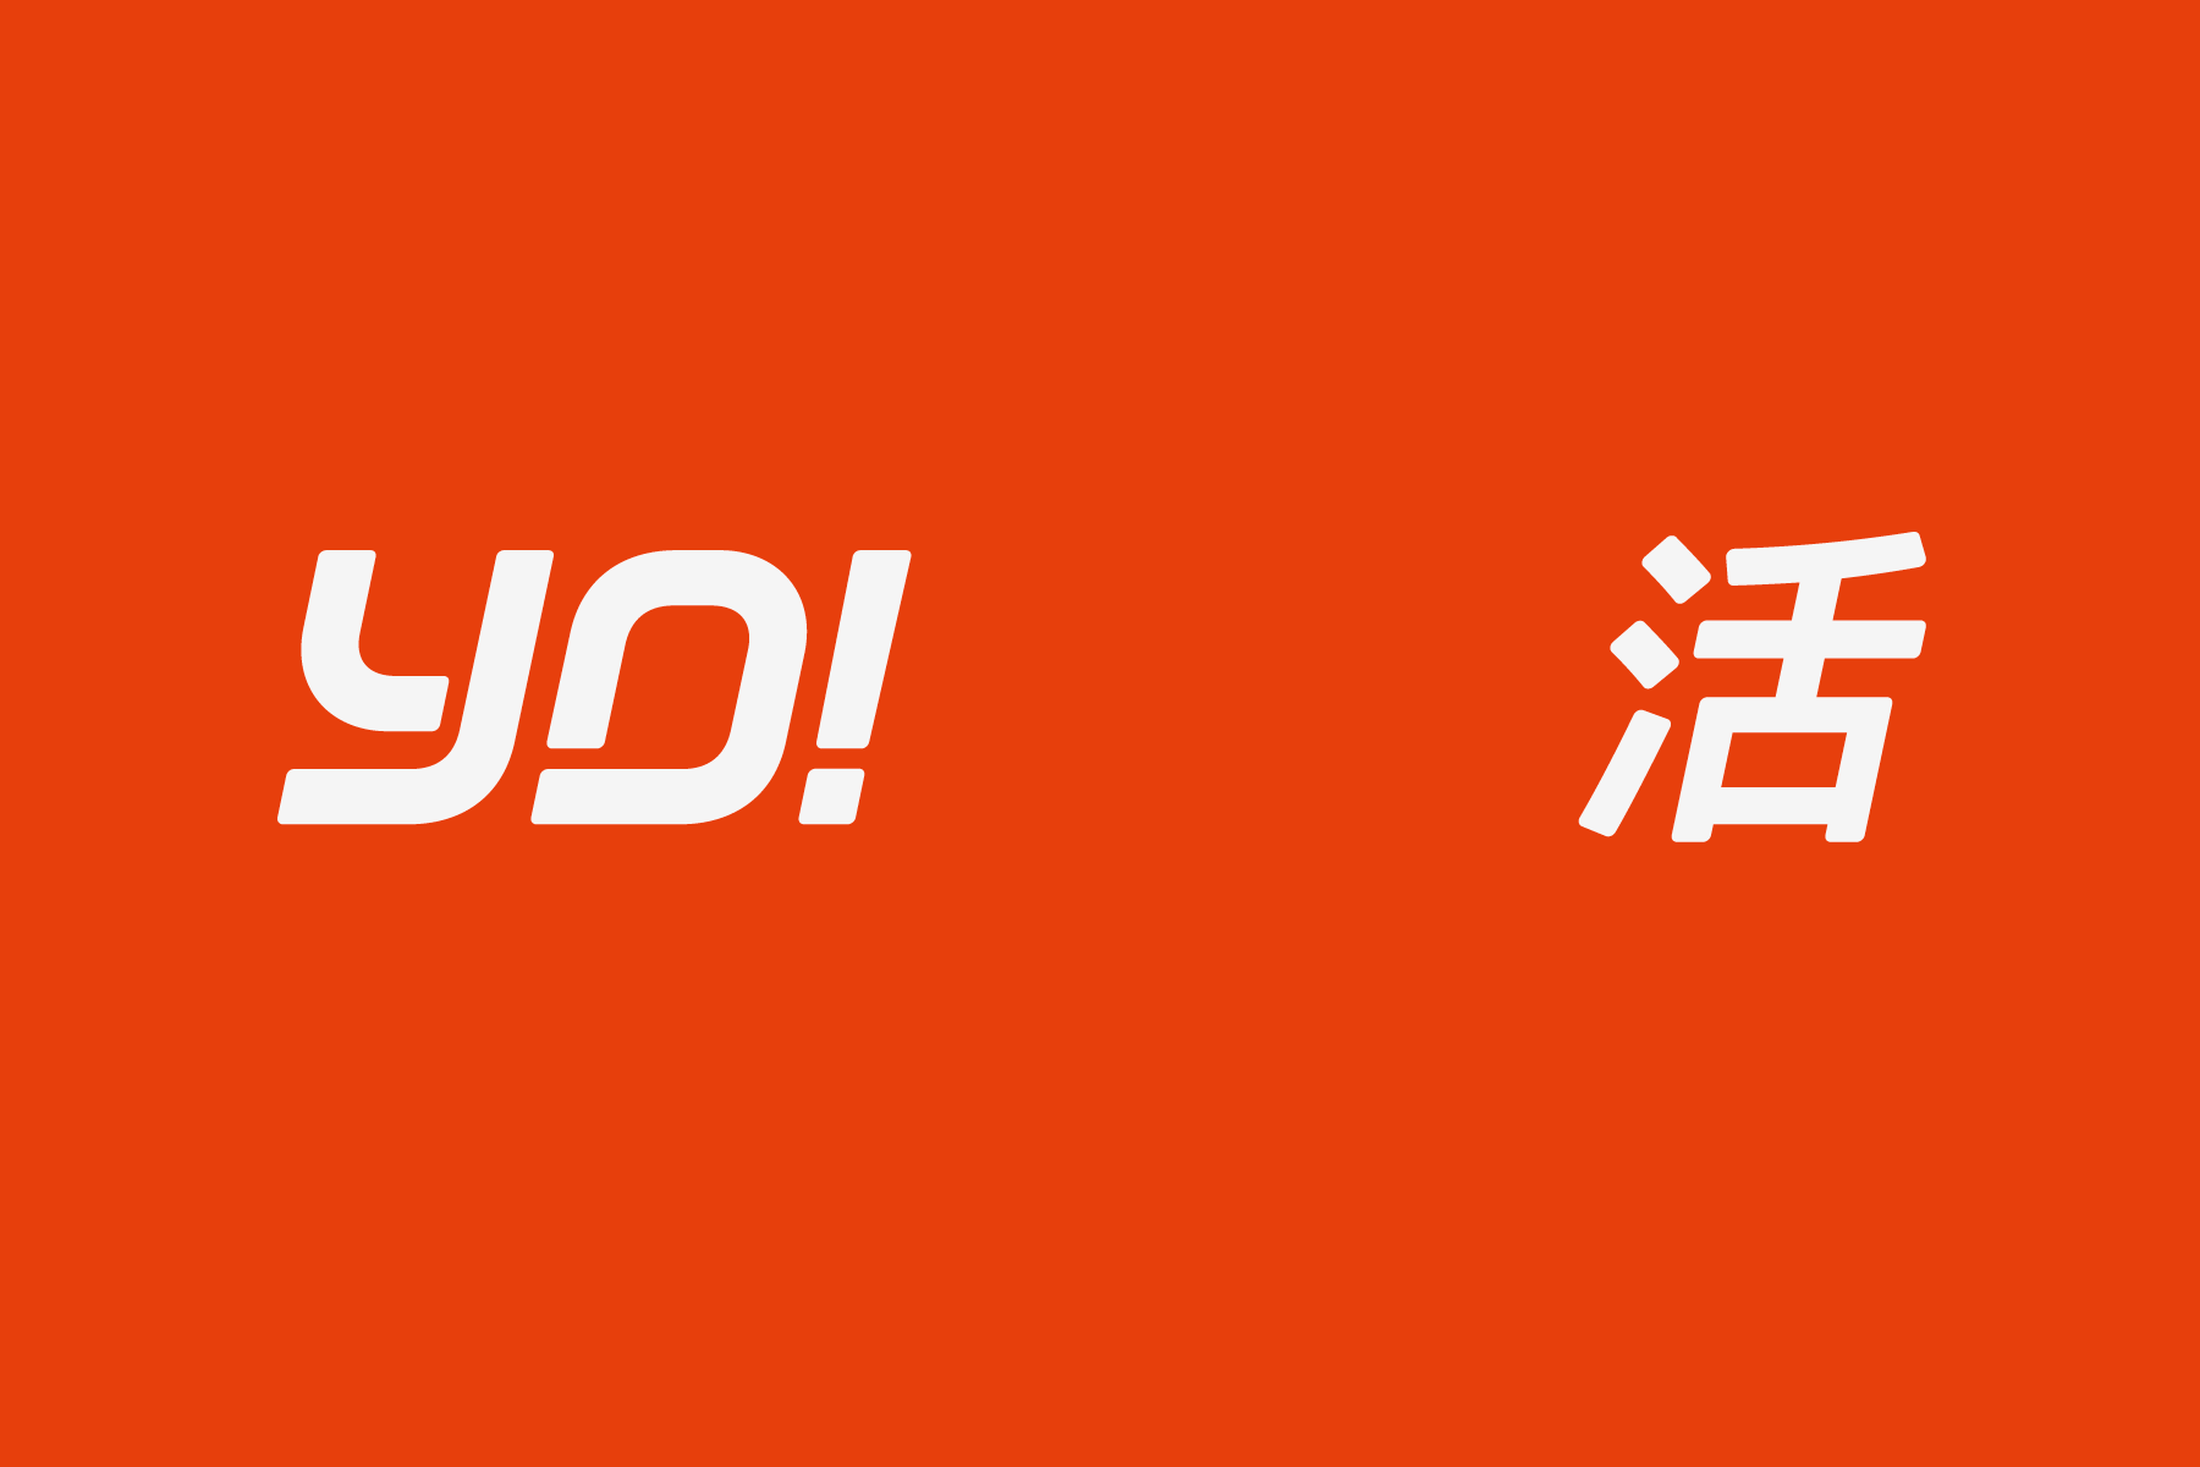 The addition of a kanji character to the logo adds an authentic Japanese flavour.